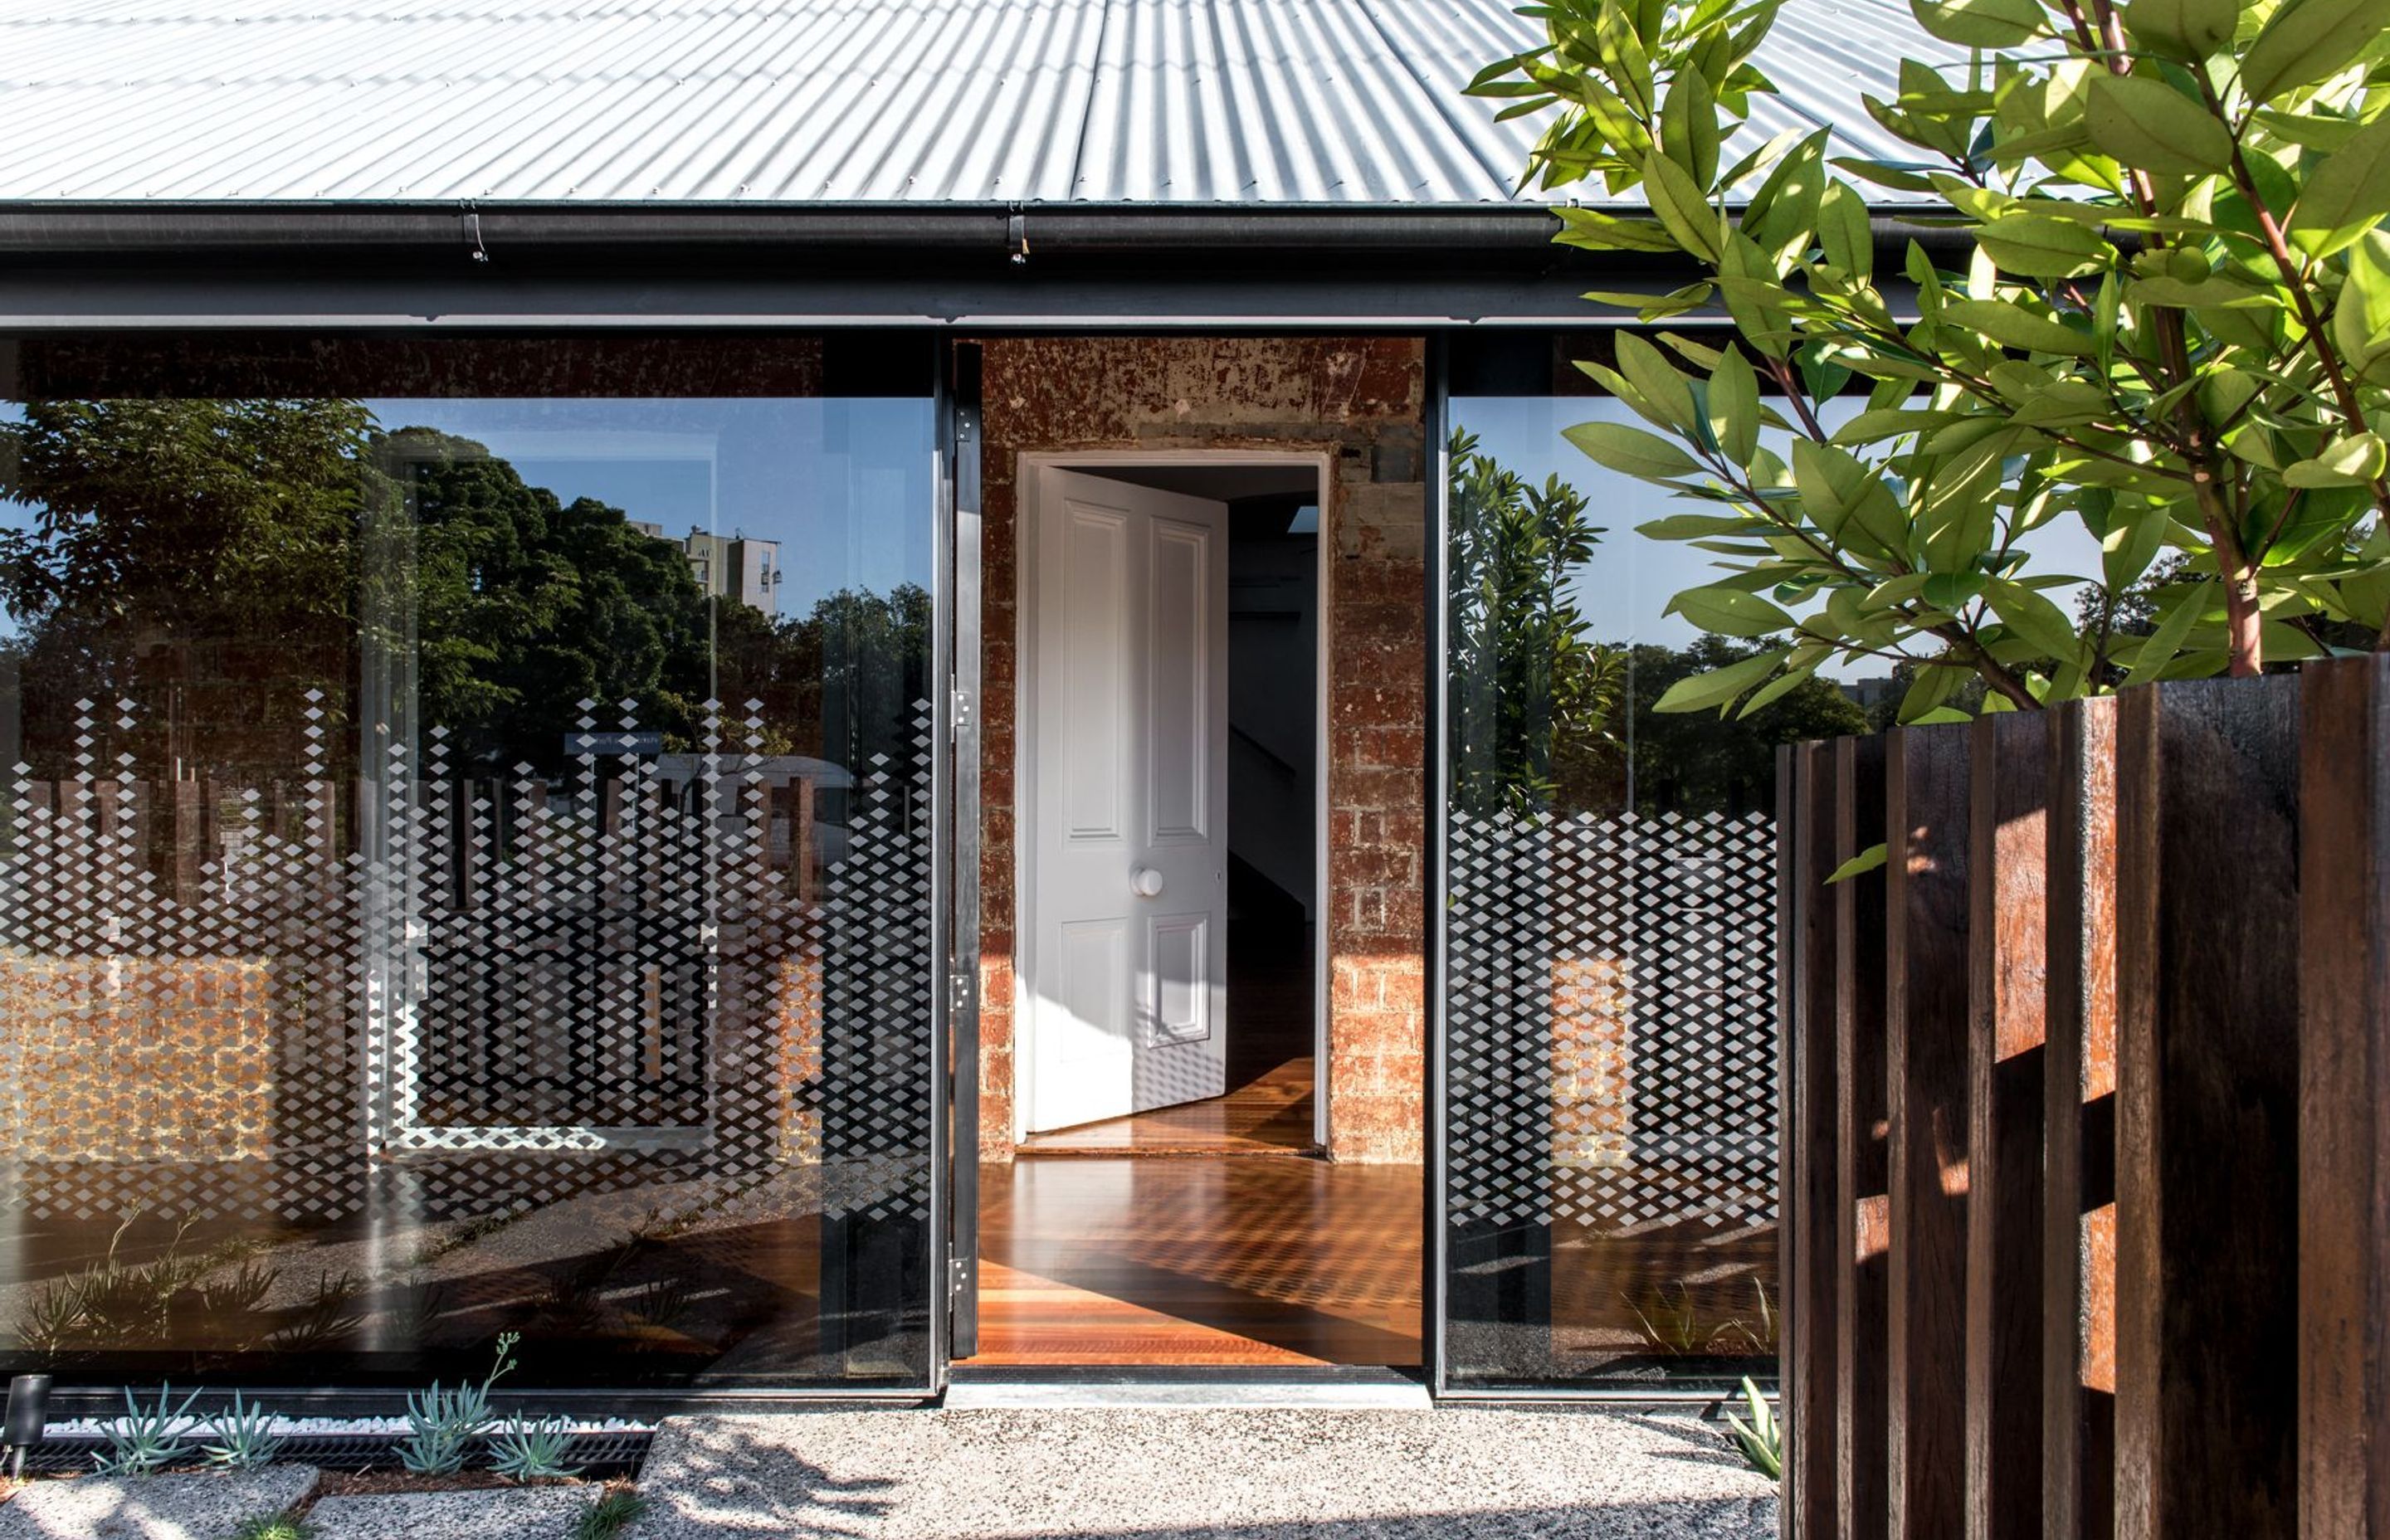 Photography: Cathy Schusler | The tinted glass facade along the front verandahs creates a strong contrast to the heritage brick facade behind.